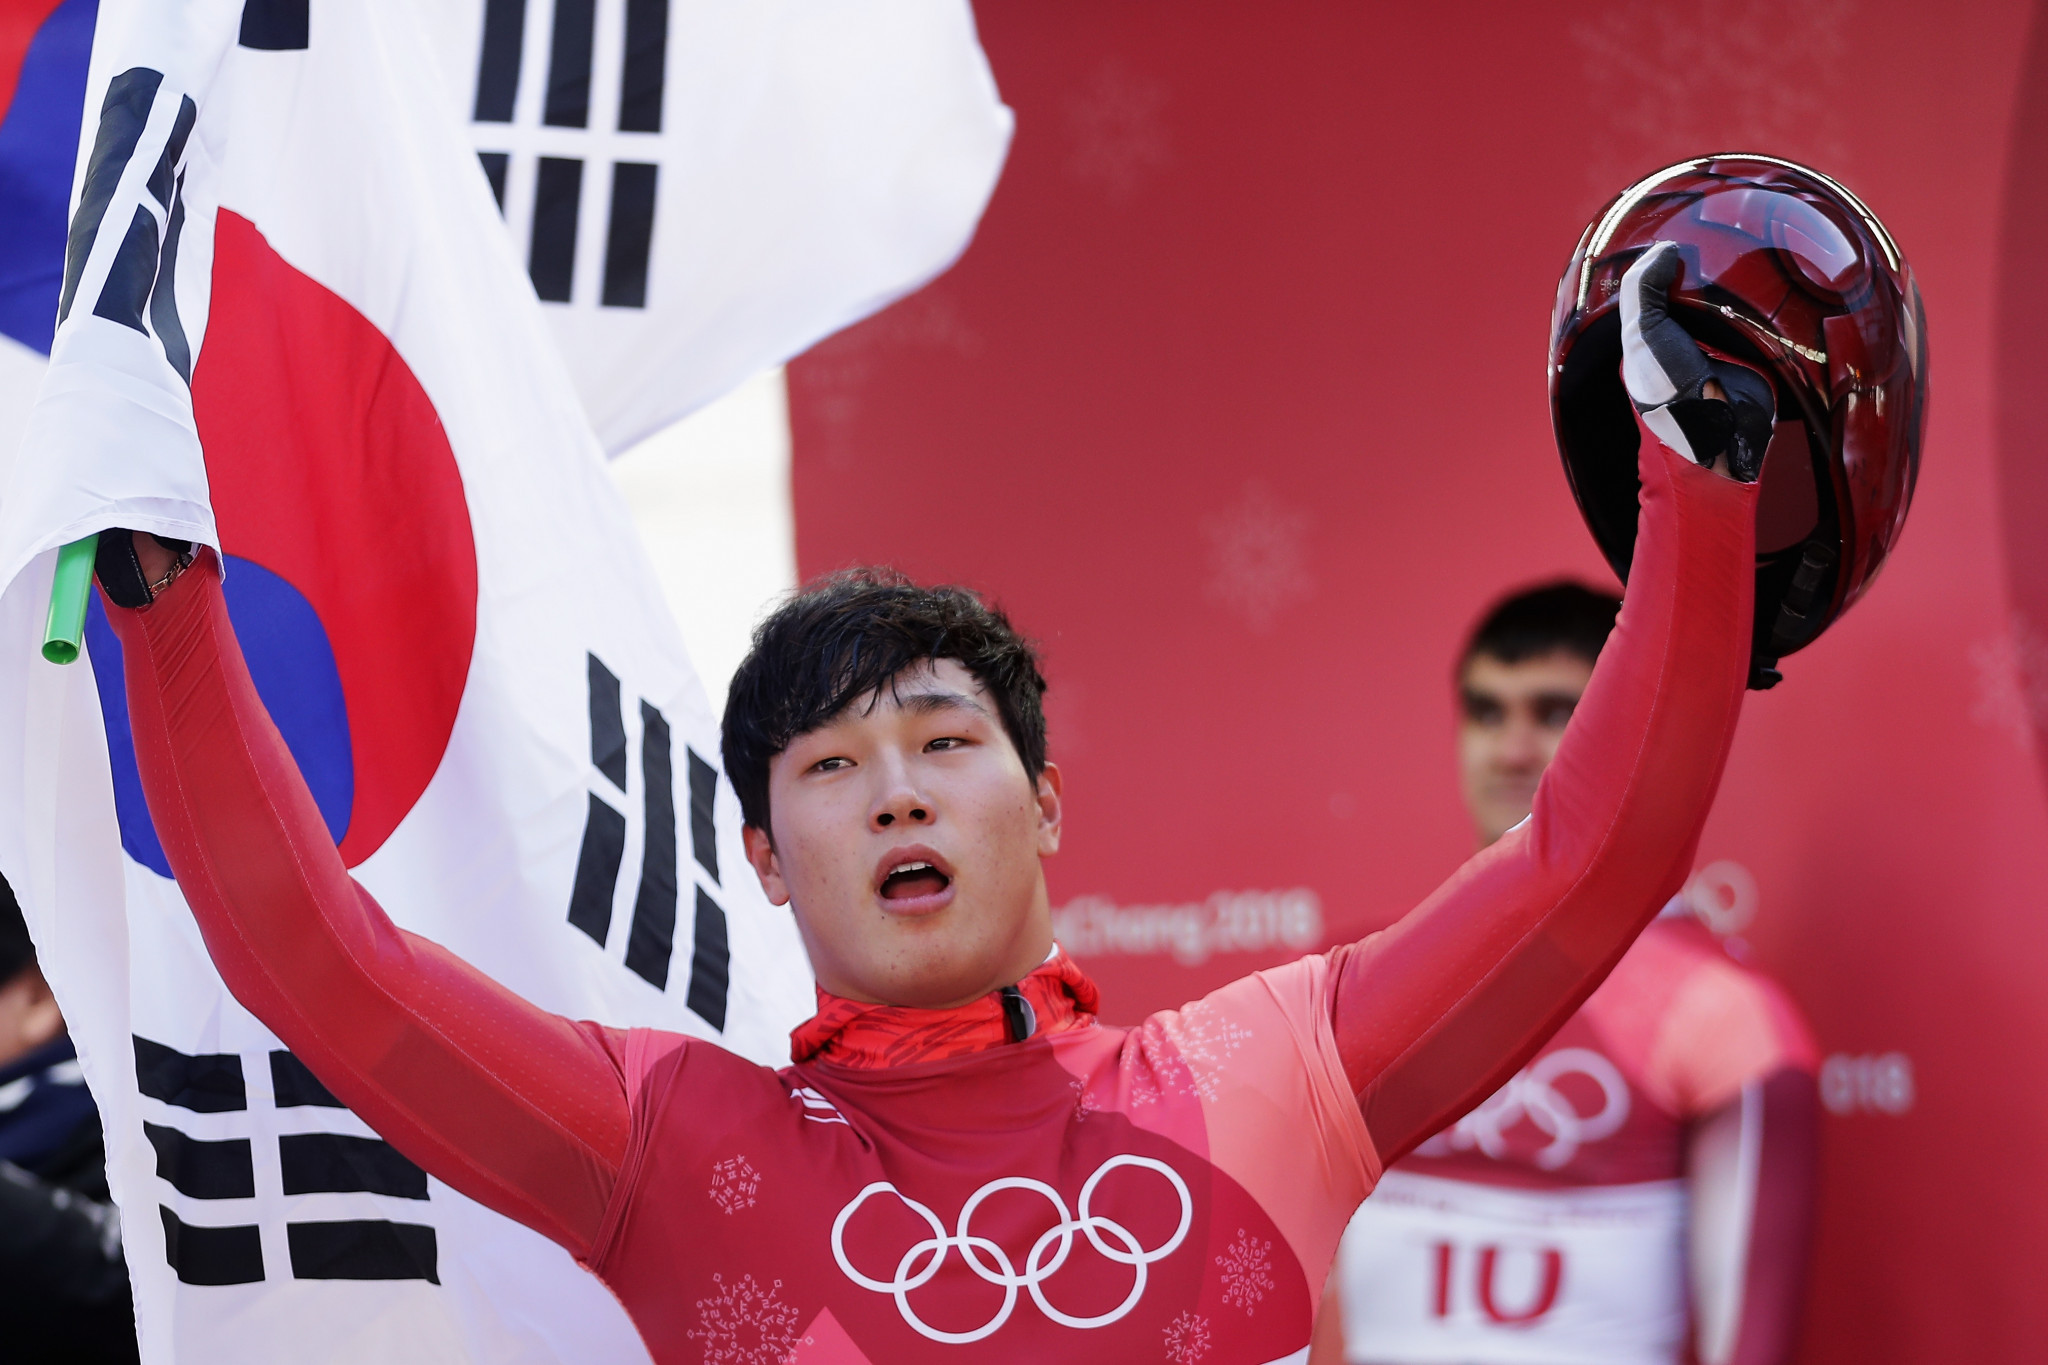 Yun Sungbin claimed hosts South Korea’s second gold medal of the Pyeongchang 2018 Winter Olympic Games after winning the men’s skeleton event today ©Getty Images